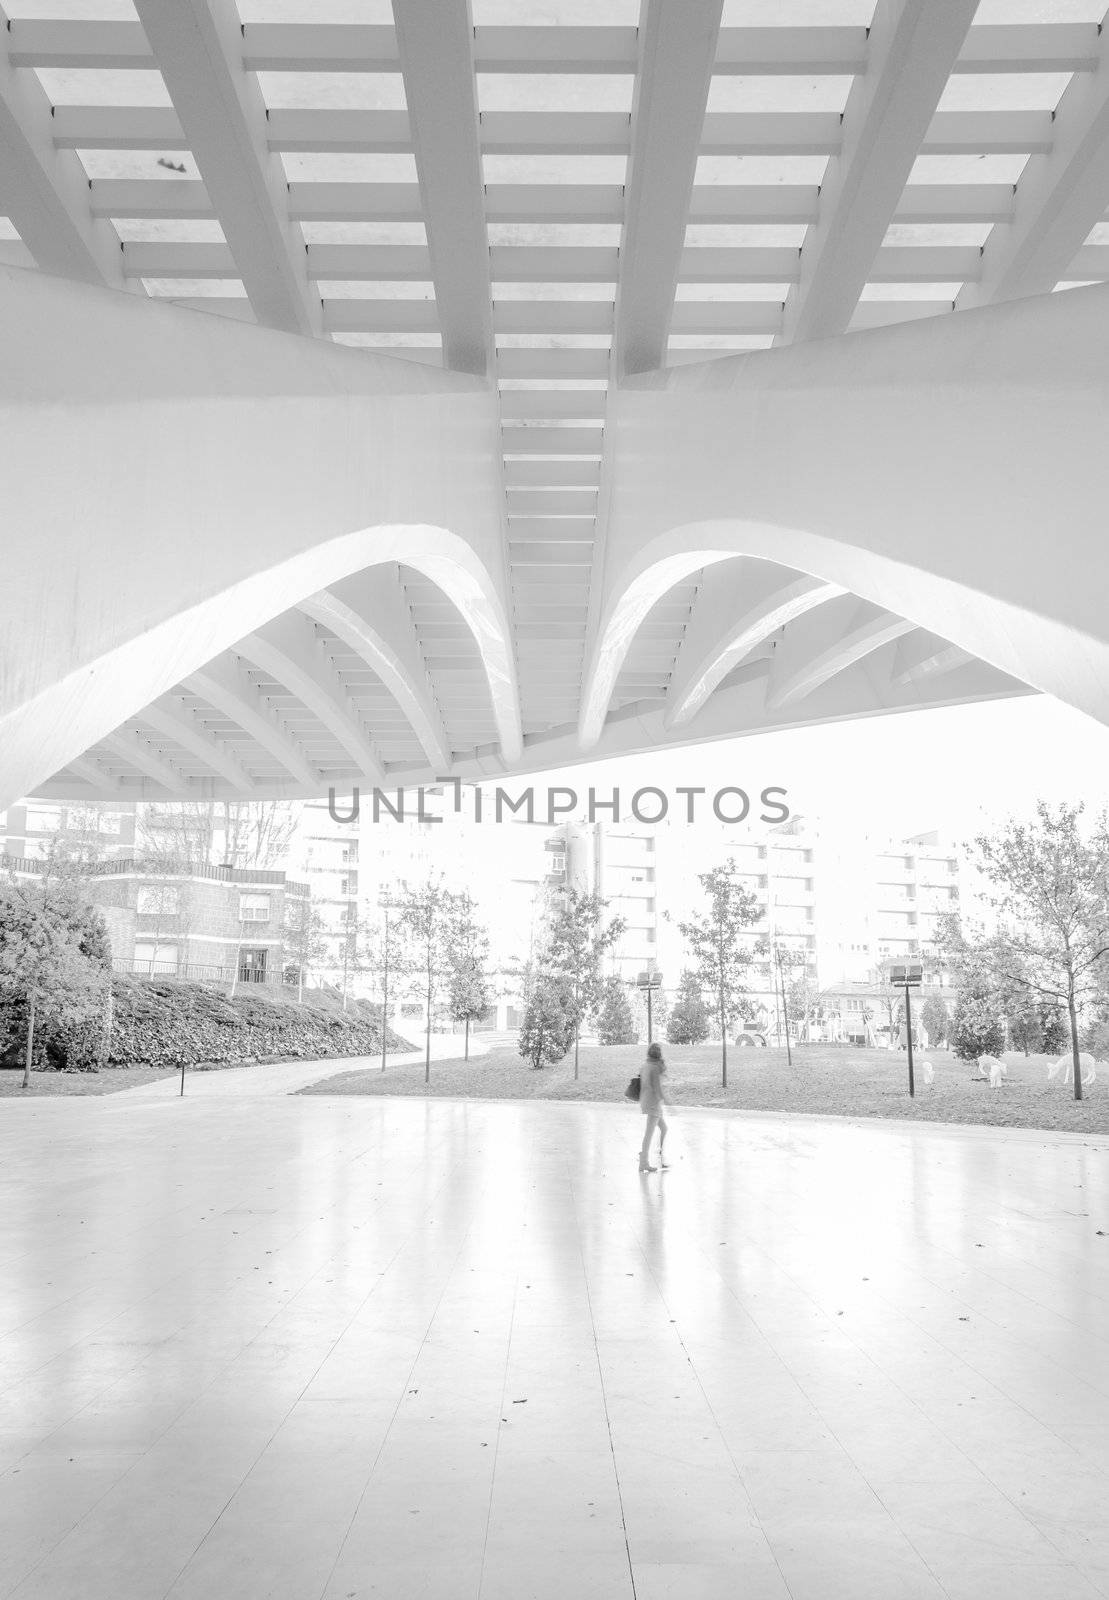 Arquitecture detail of conference and exhibition centre Ciudad de Oviedo in Asturias, Spain, on December 03, 2012. The modern center was designed by spanish architect Santiago Calatrava, and inagurated in May 2011